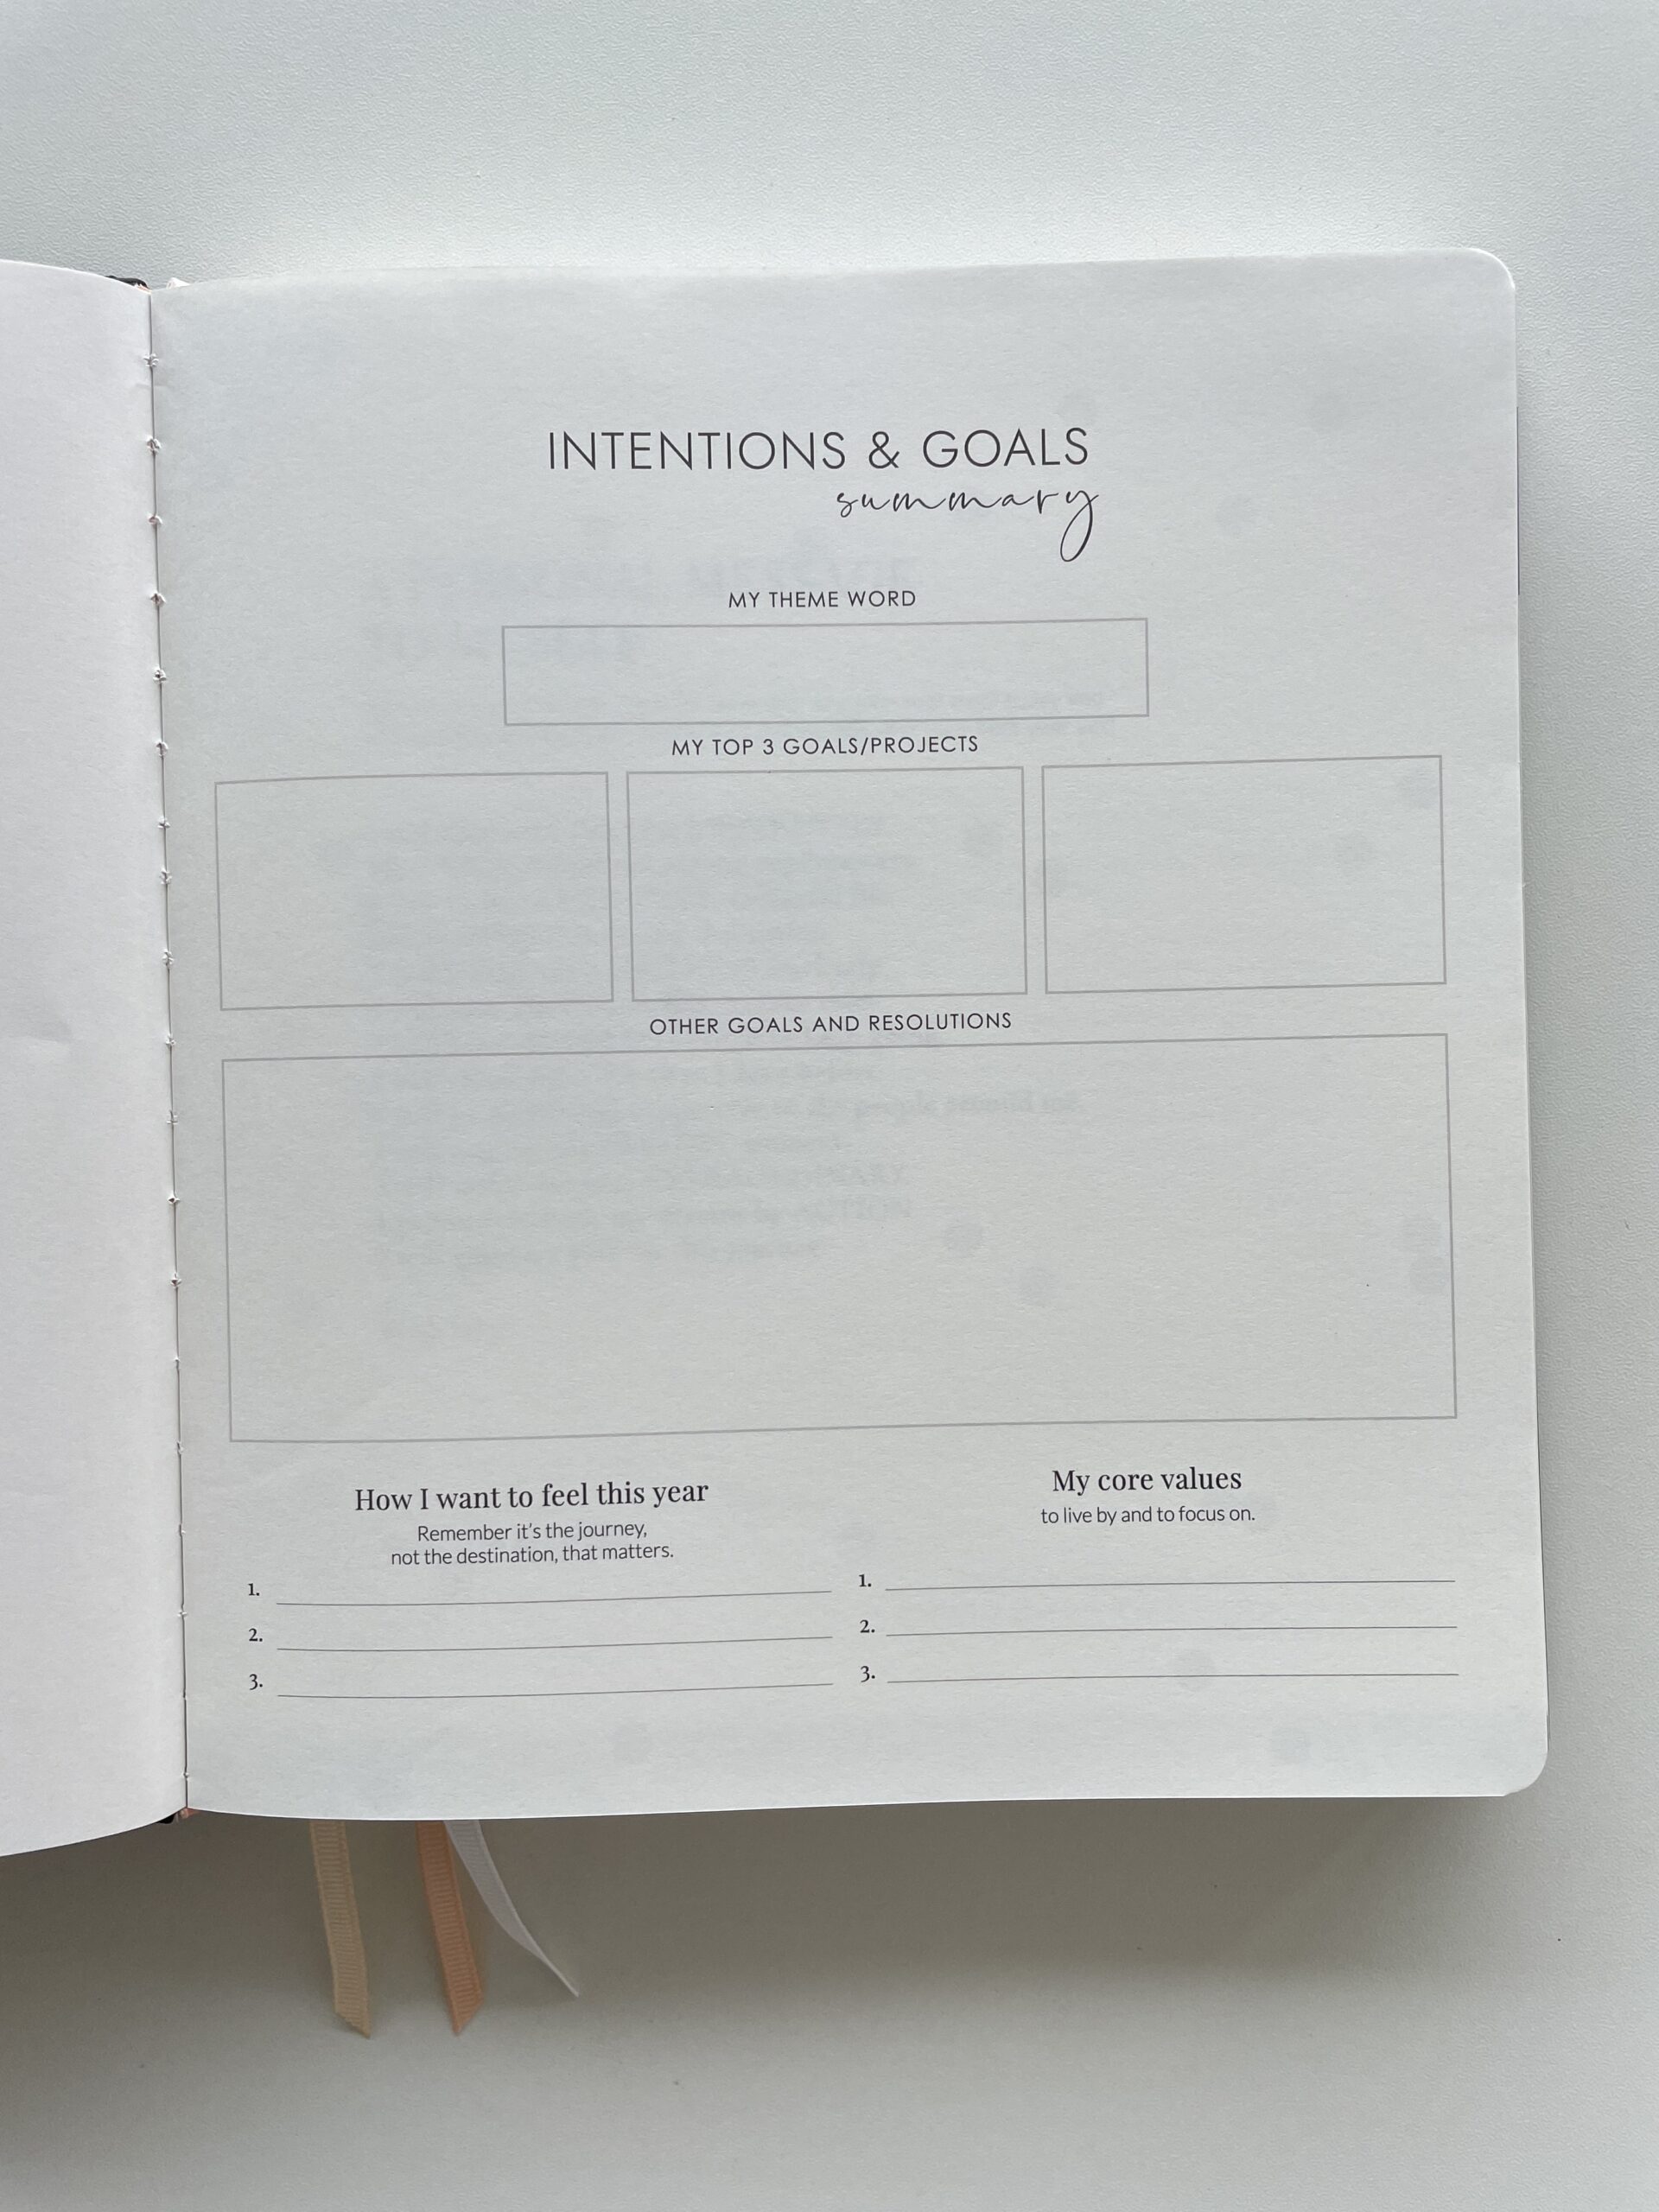 LH Agenda planner review intentions and goals